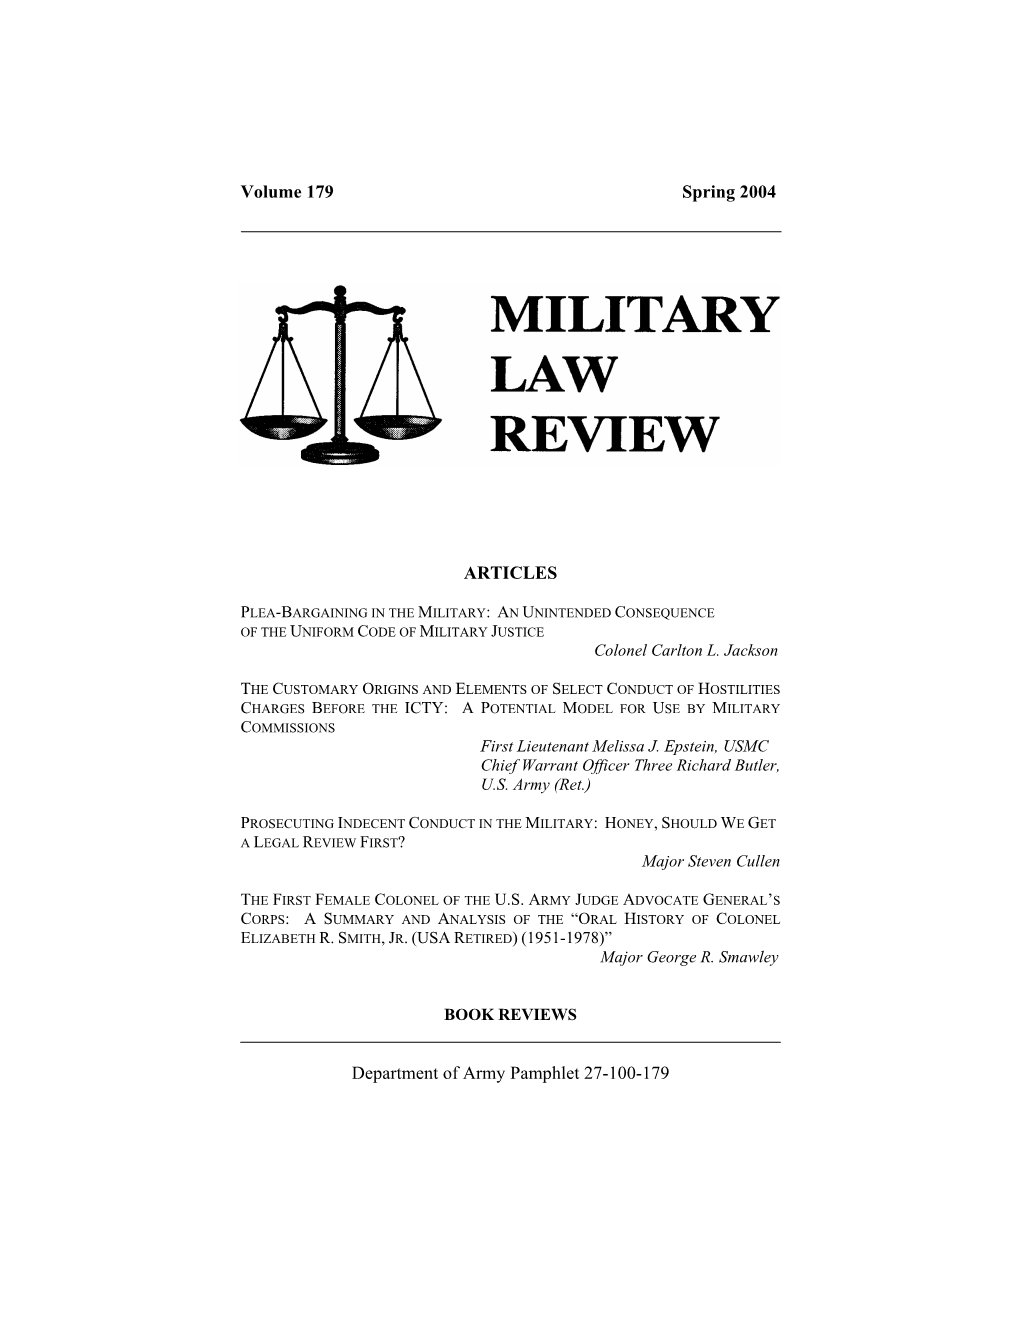 Volume 179 Spring 2004 ARTICLES Department of Army Pamphlet 27